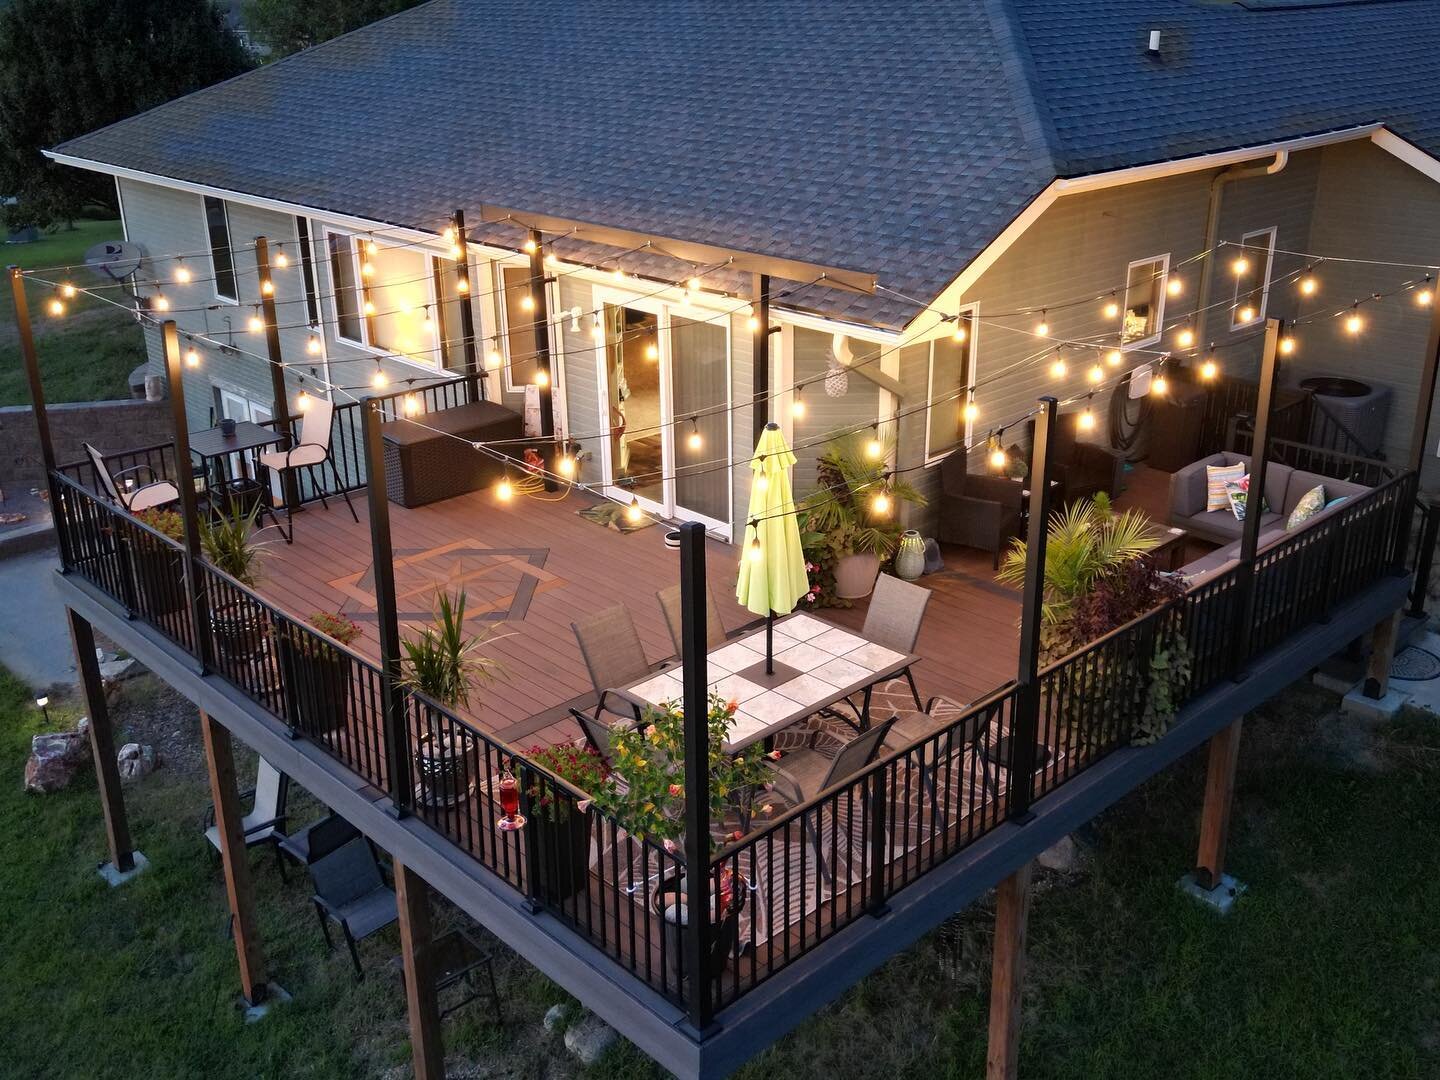 Check out the custom inlay we did on this deck!! We hand cut and built using multiple pieces of decking and worked with our customers to bring their idea to life. We used extended posts specifically made to accommodate the patio lighting, and a Hidea